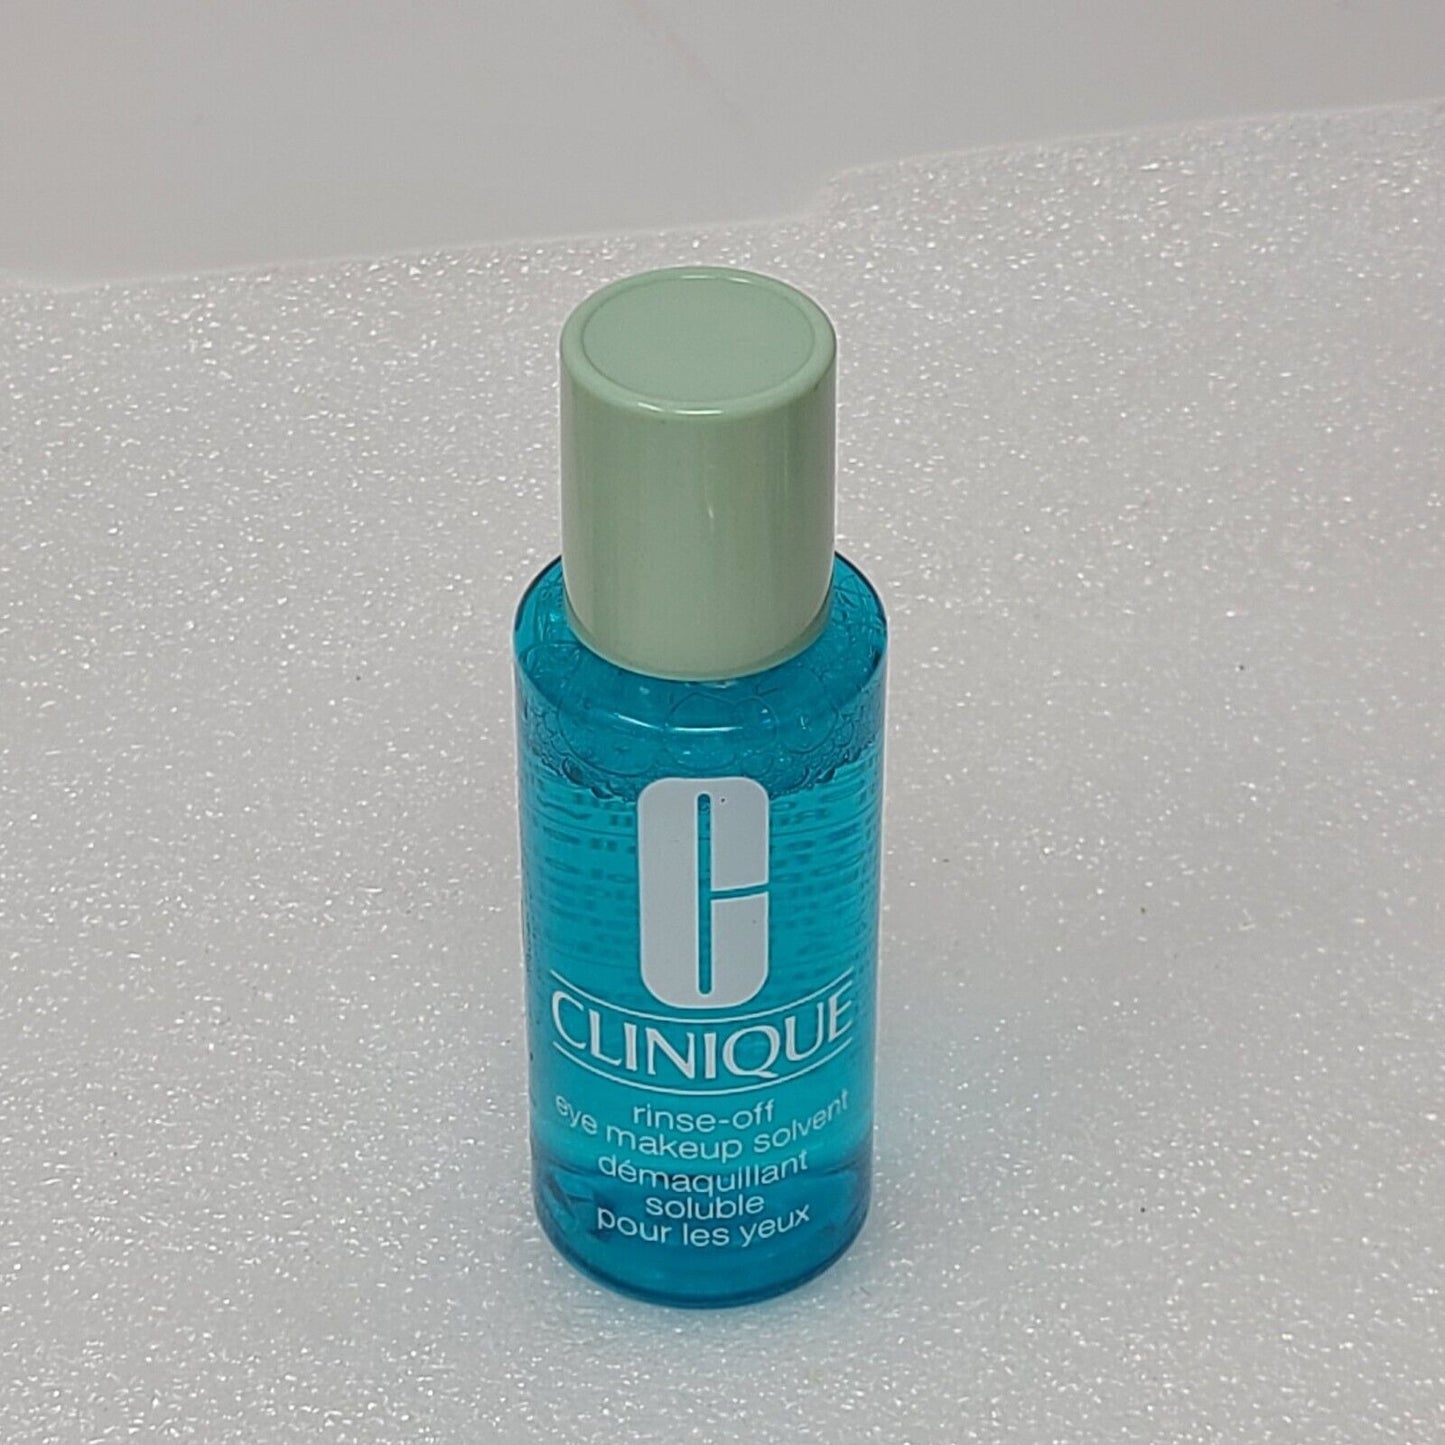 Clinique Rinse-Off Eye Makeup Solvent Remover 2 fl oz / 60 ml